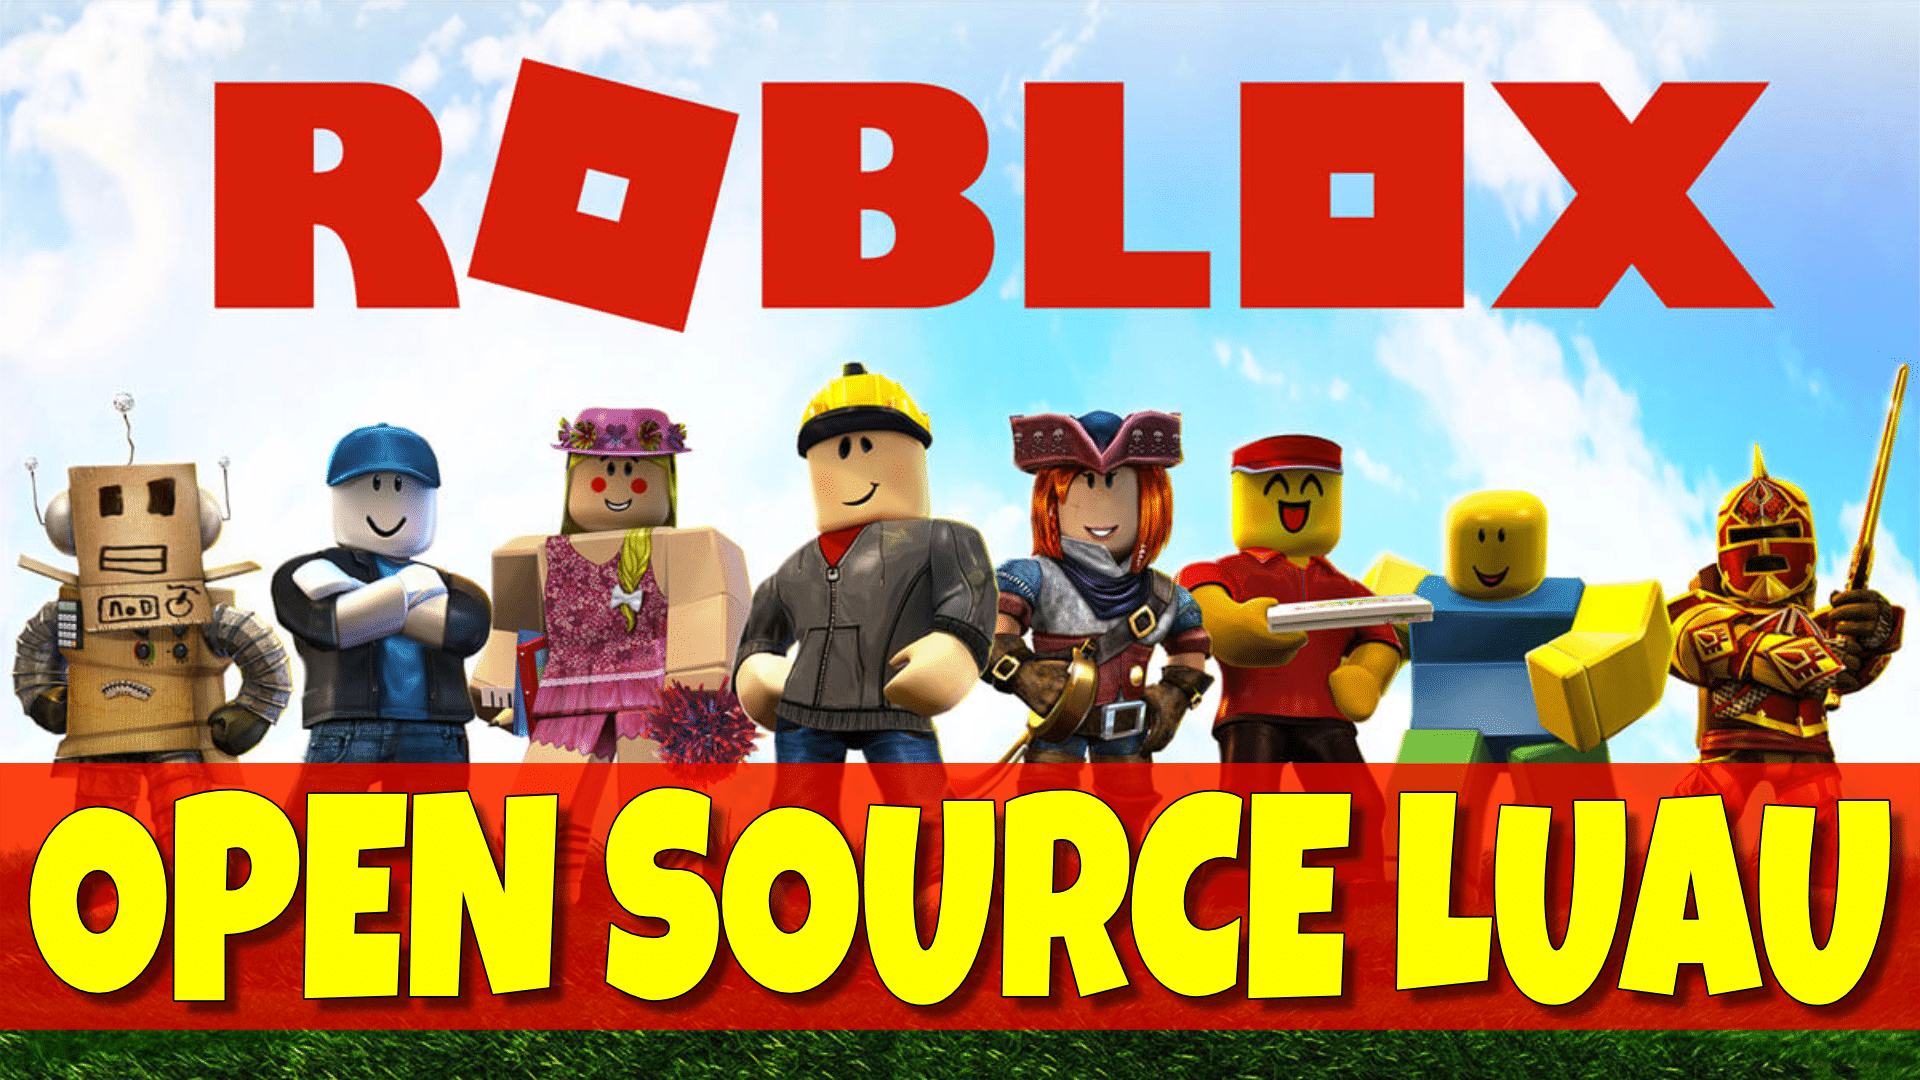 Roblox LSP - Full Intellisense for Roblox and Luau! - Community